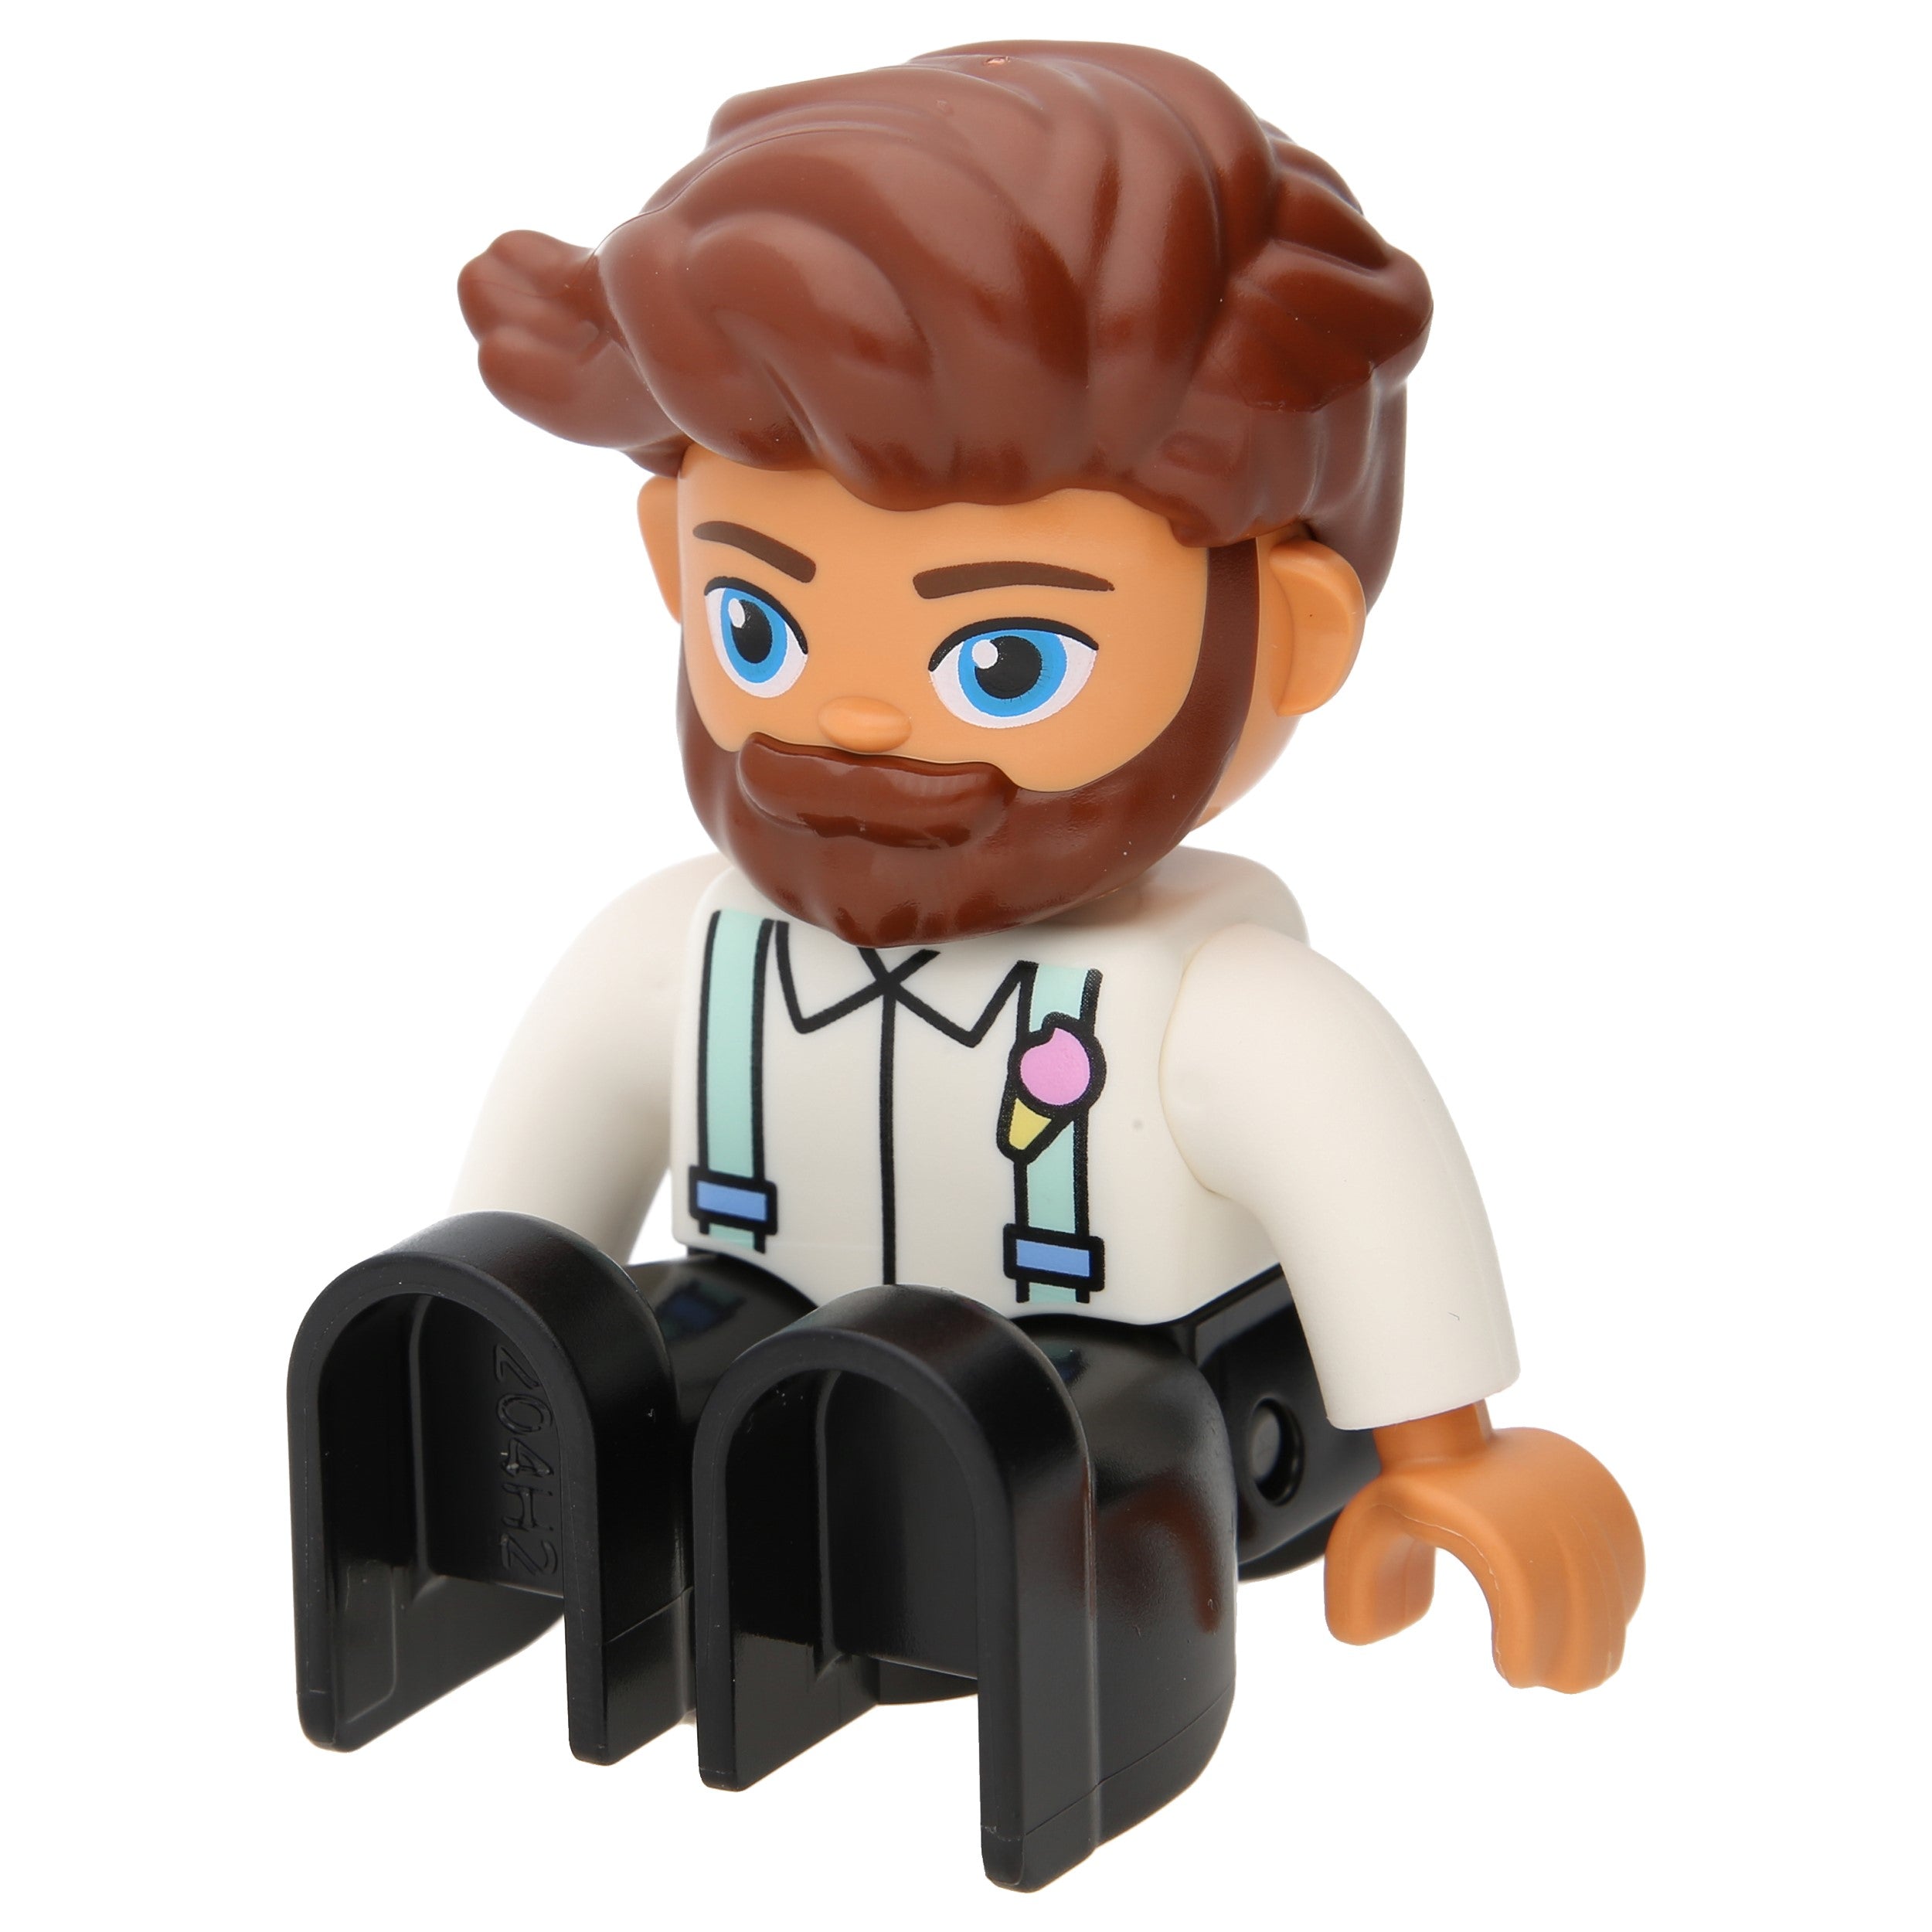 LEGO DUPLO Figures - man with black legs and white top